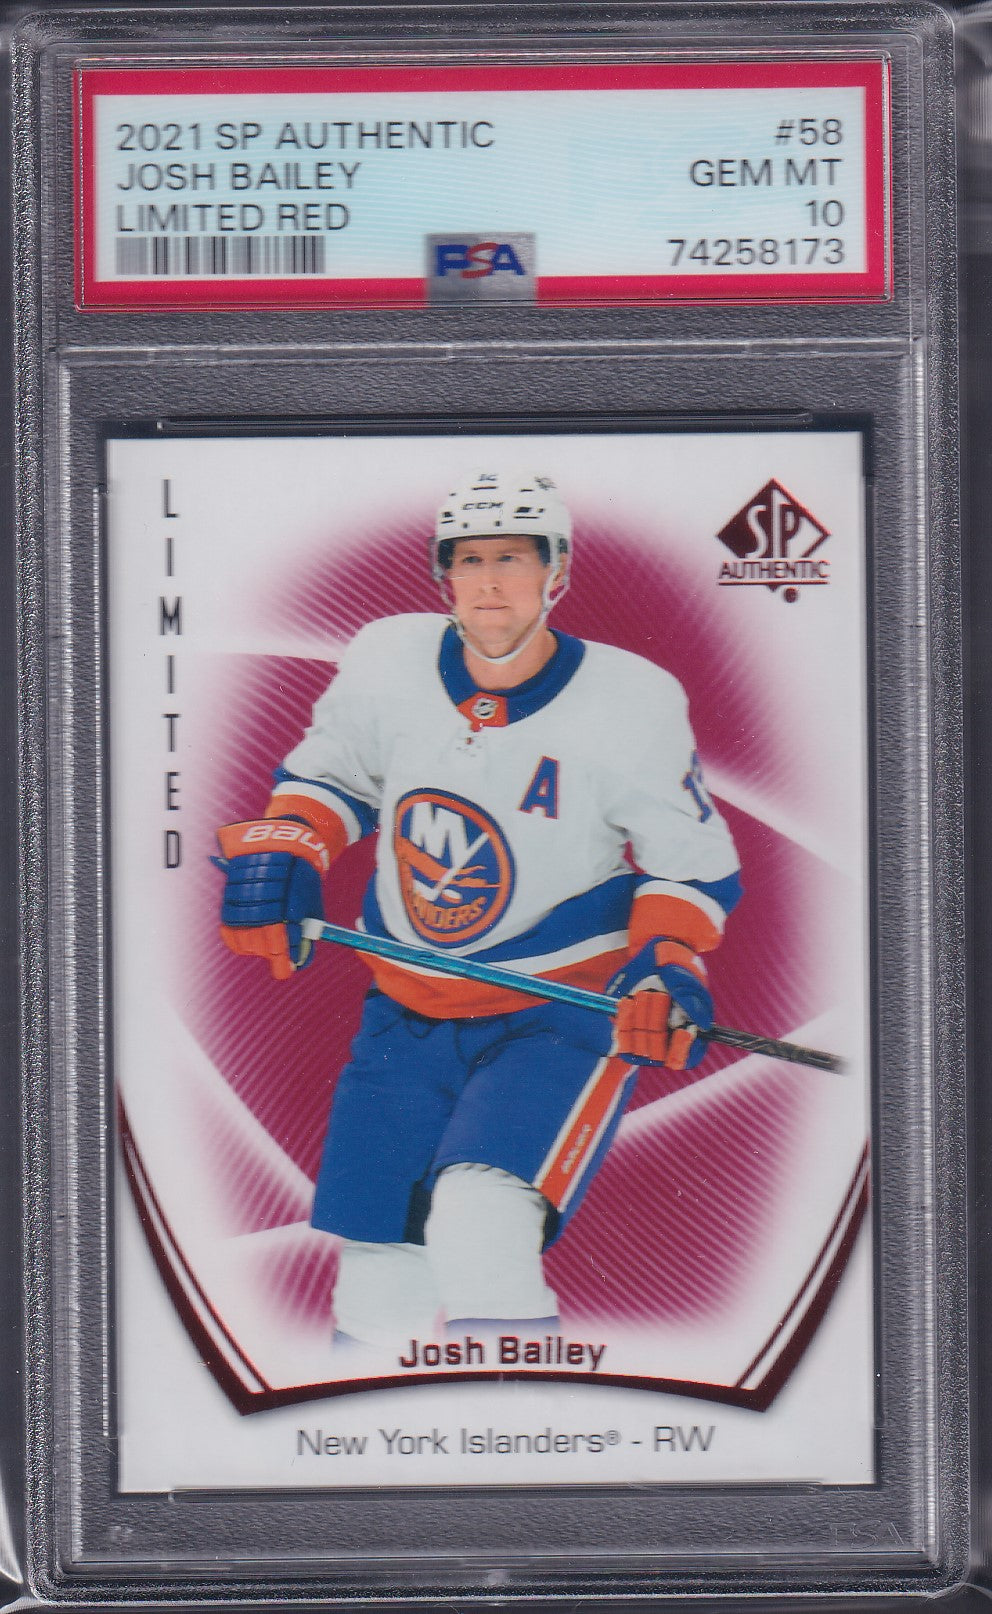 JOSH BAILEY - 2021 SP Authentic Limited RED #58, PSA 10